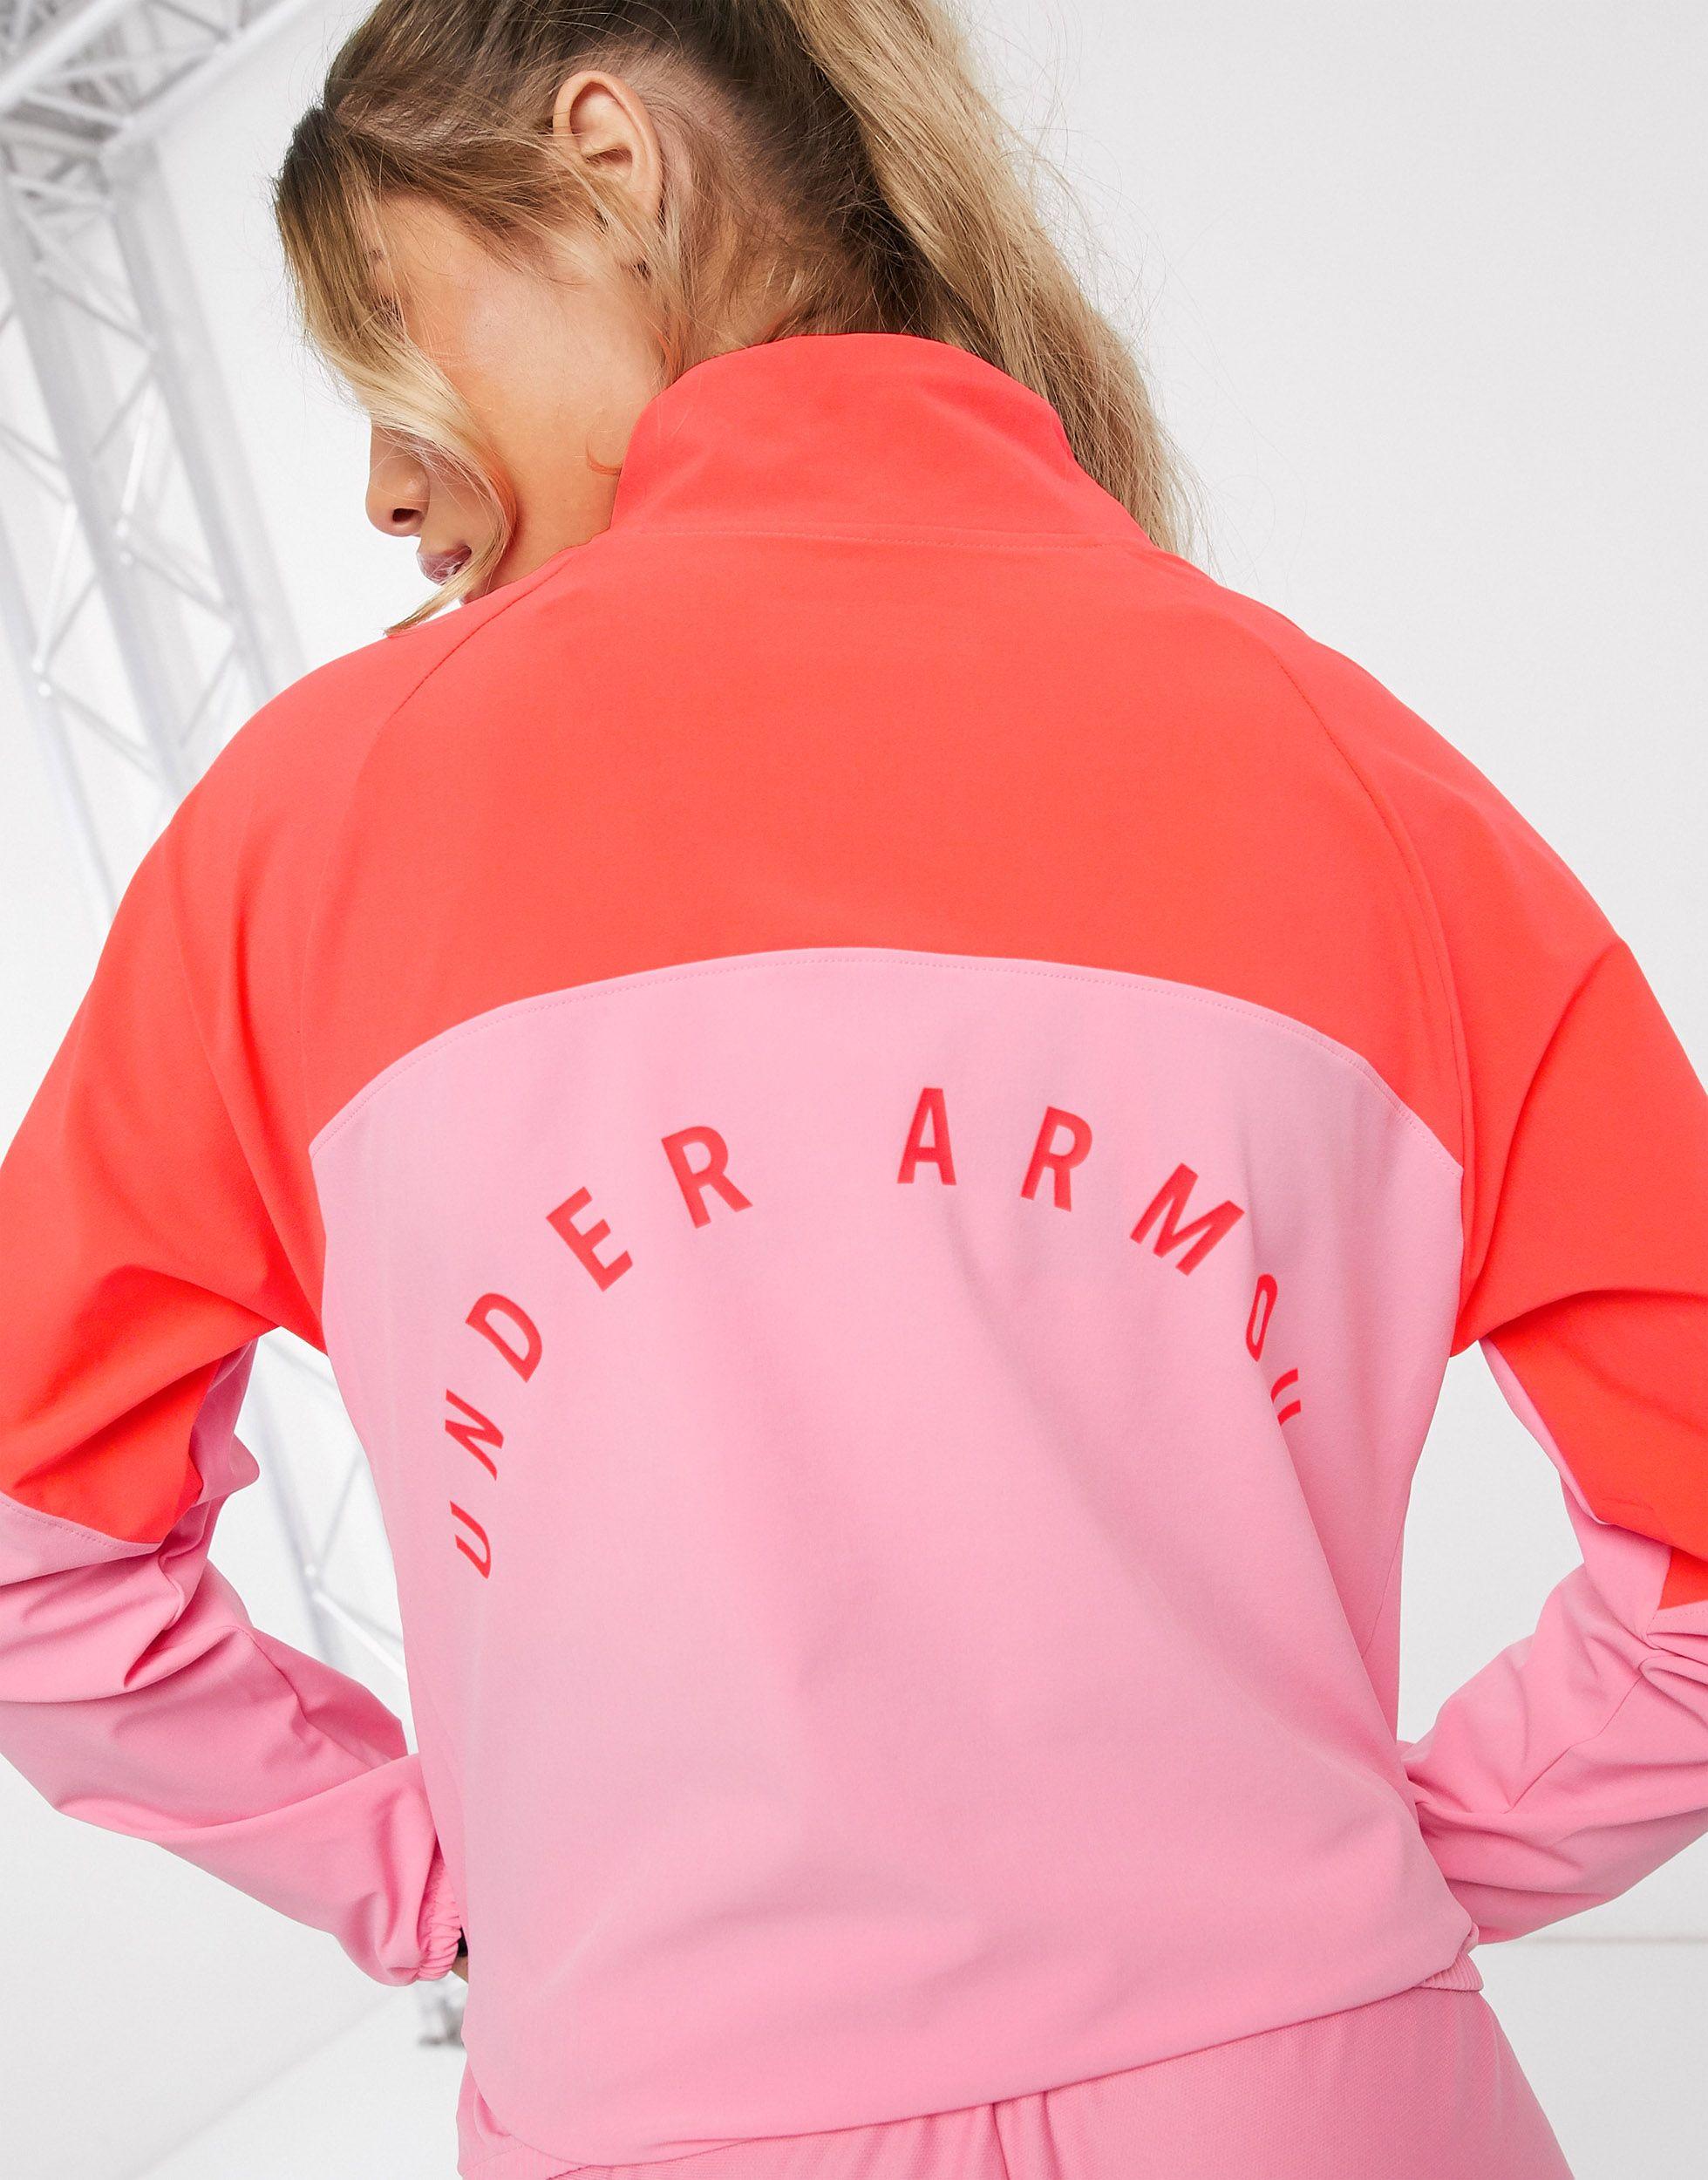 Under Armour Synthetic Training Woven Colour Block Jacket in Pink - Lyst